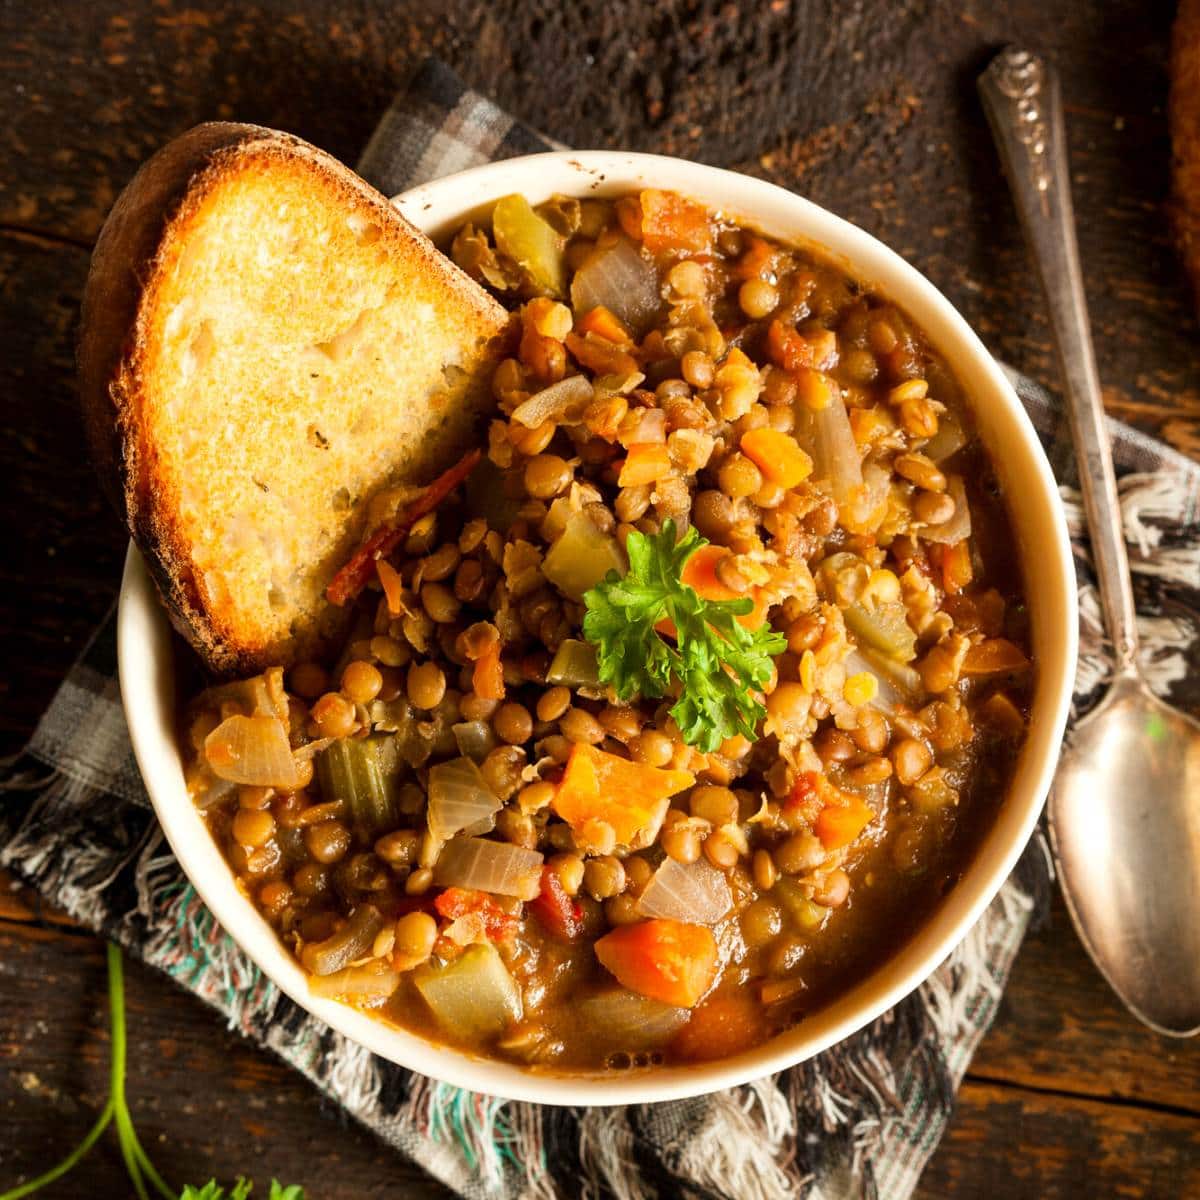 A white dish filled with lentil stew and crusty bread.